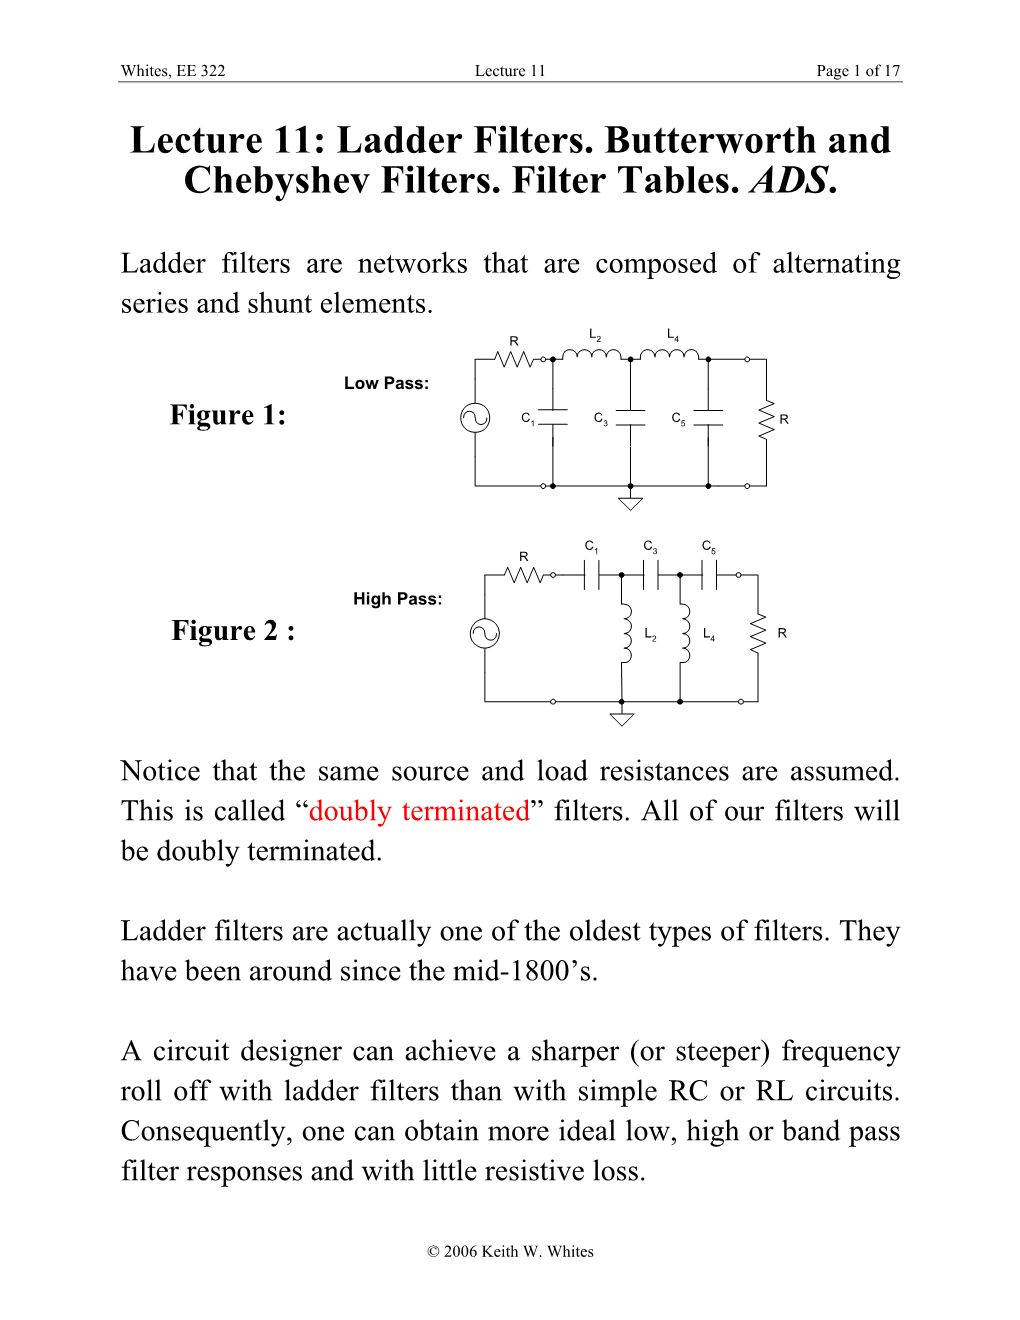 Lecture 11: Ladder Filters. Butterworth and Chebyshev Filters